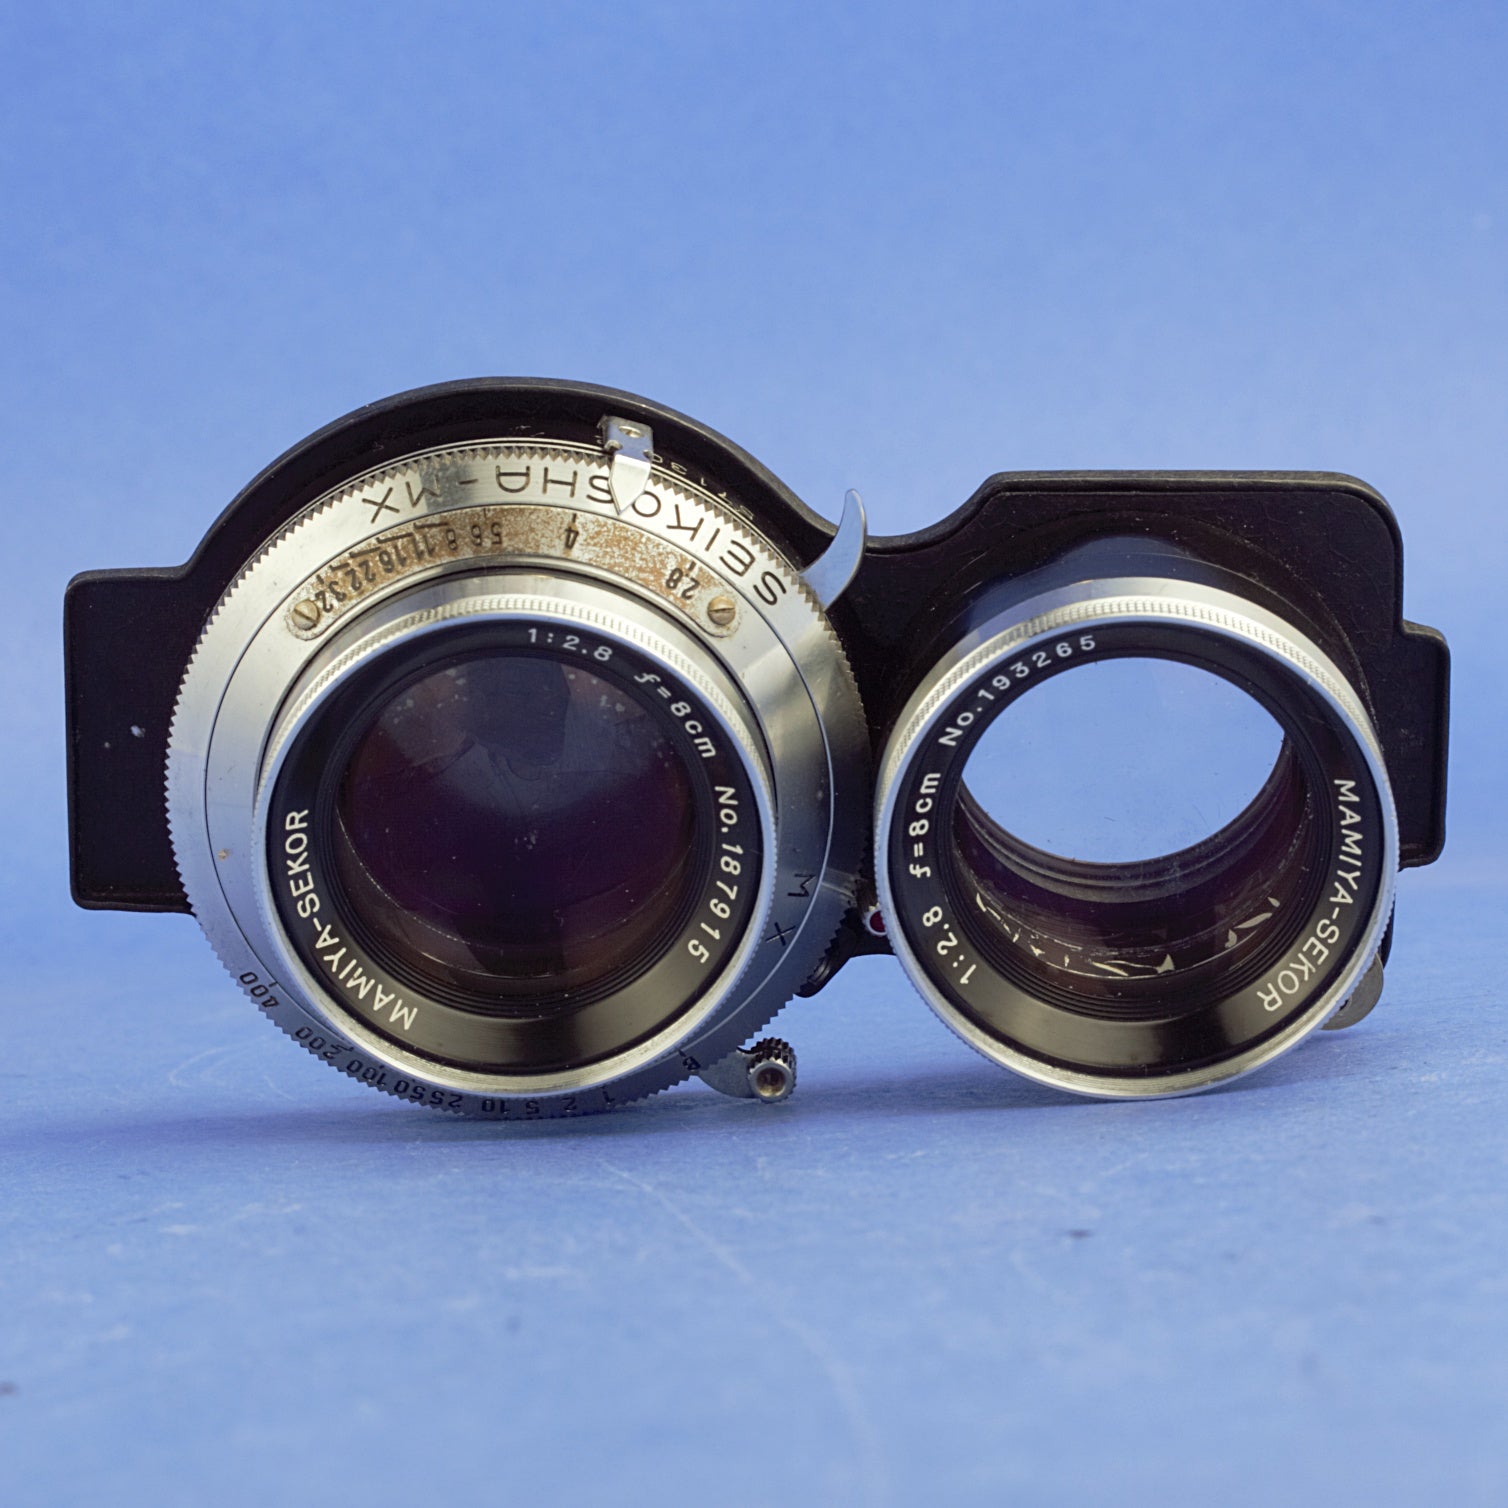 Mamiya 80mm 2.8 Blue Dot TLR Lens for C220, C330 Not Working